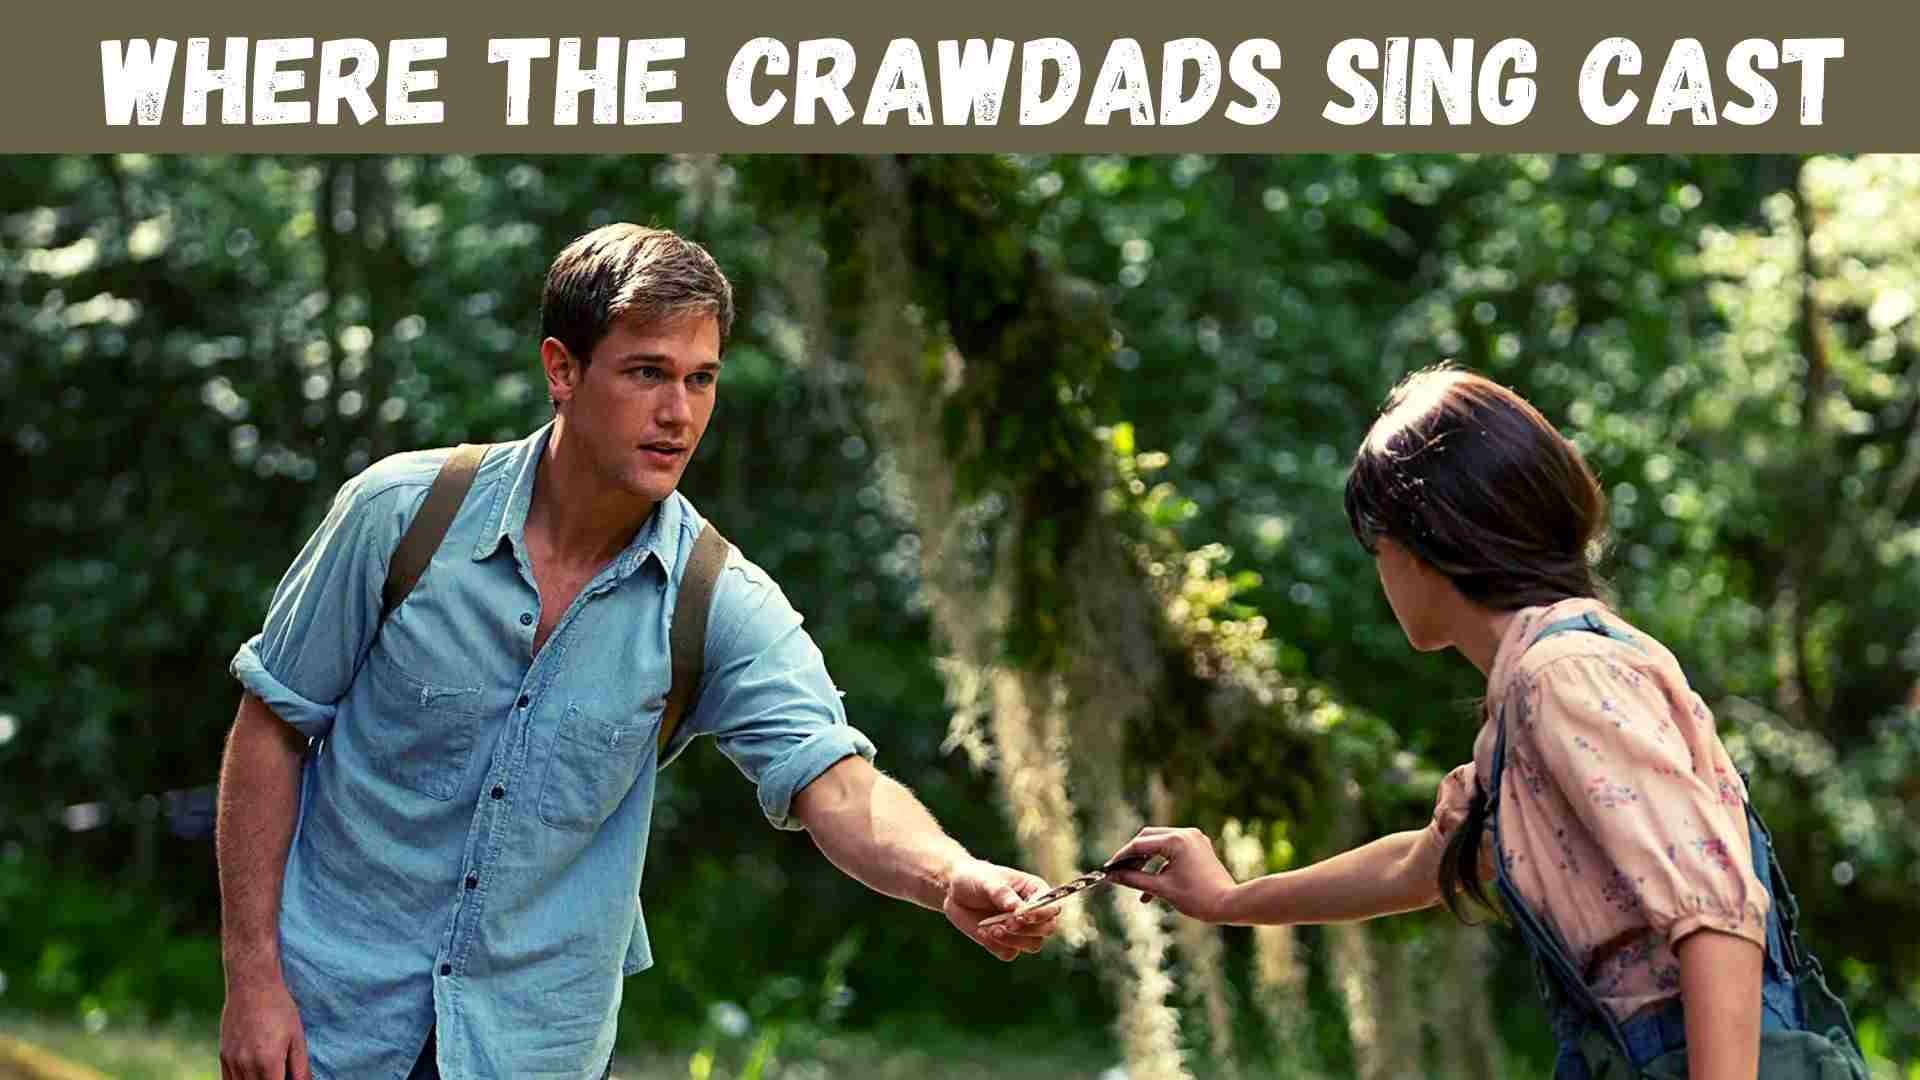 Where the Crawdads Sing Cast Wallpaper and images